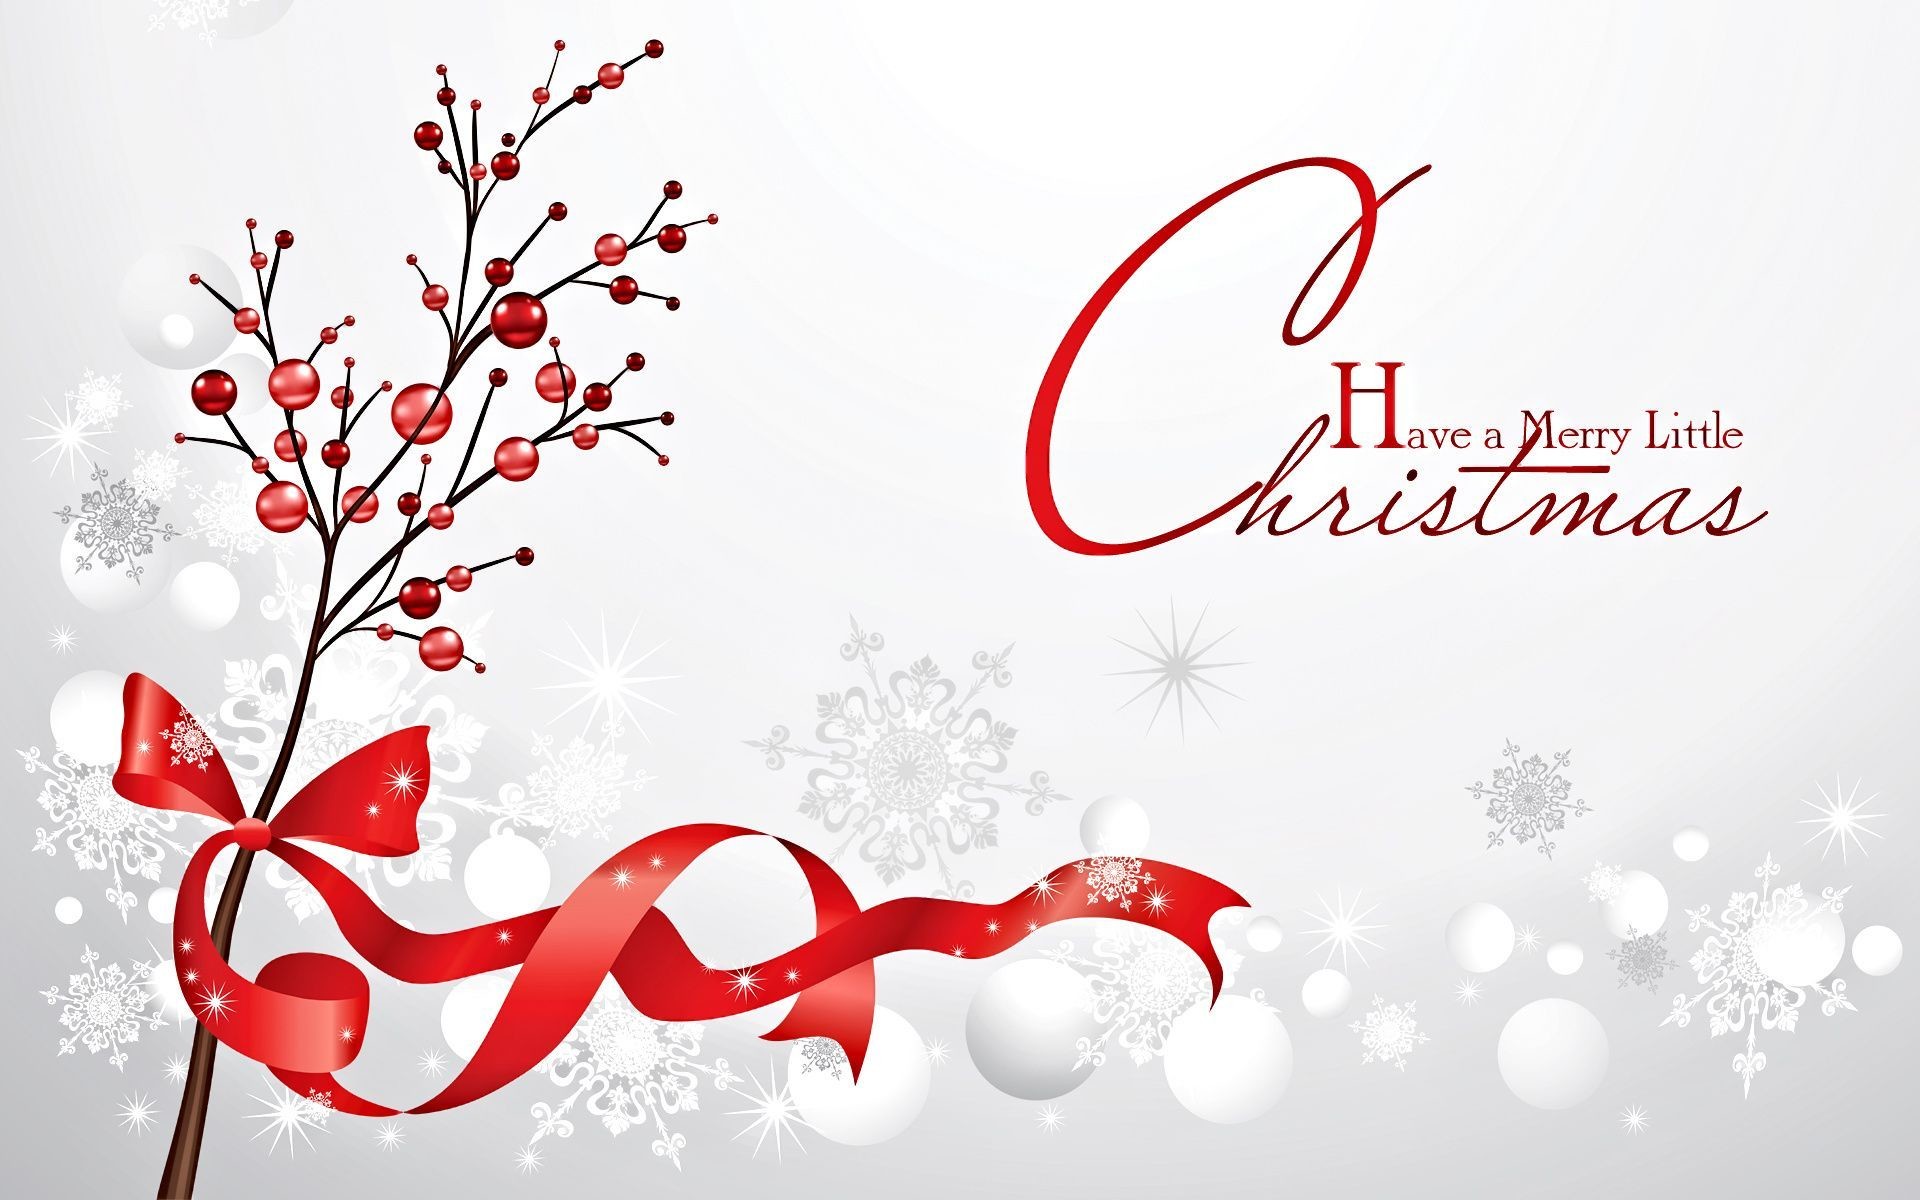 1920x1200 ... hot 20 merry christmas wallpapers for windows 8 themewallpapers com ...